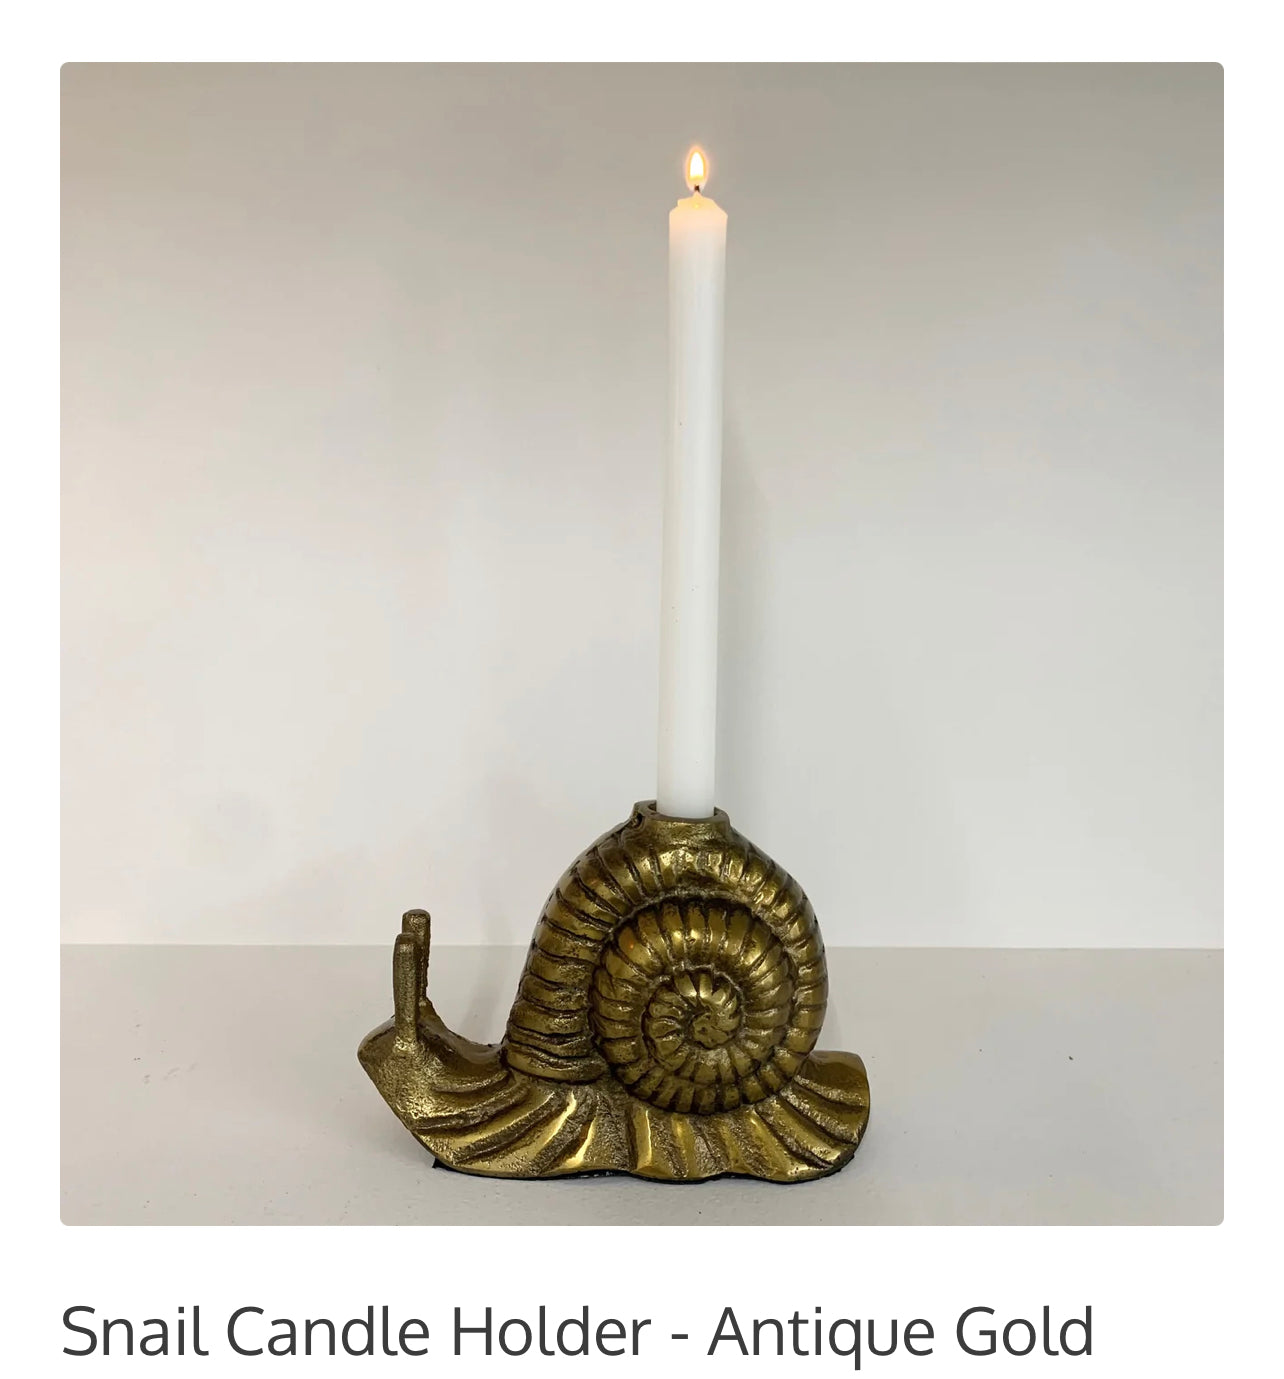 Snail candle holder